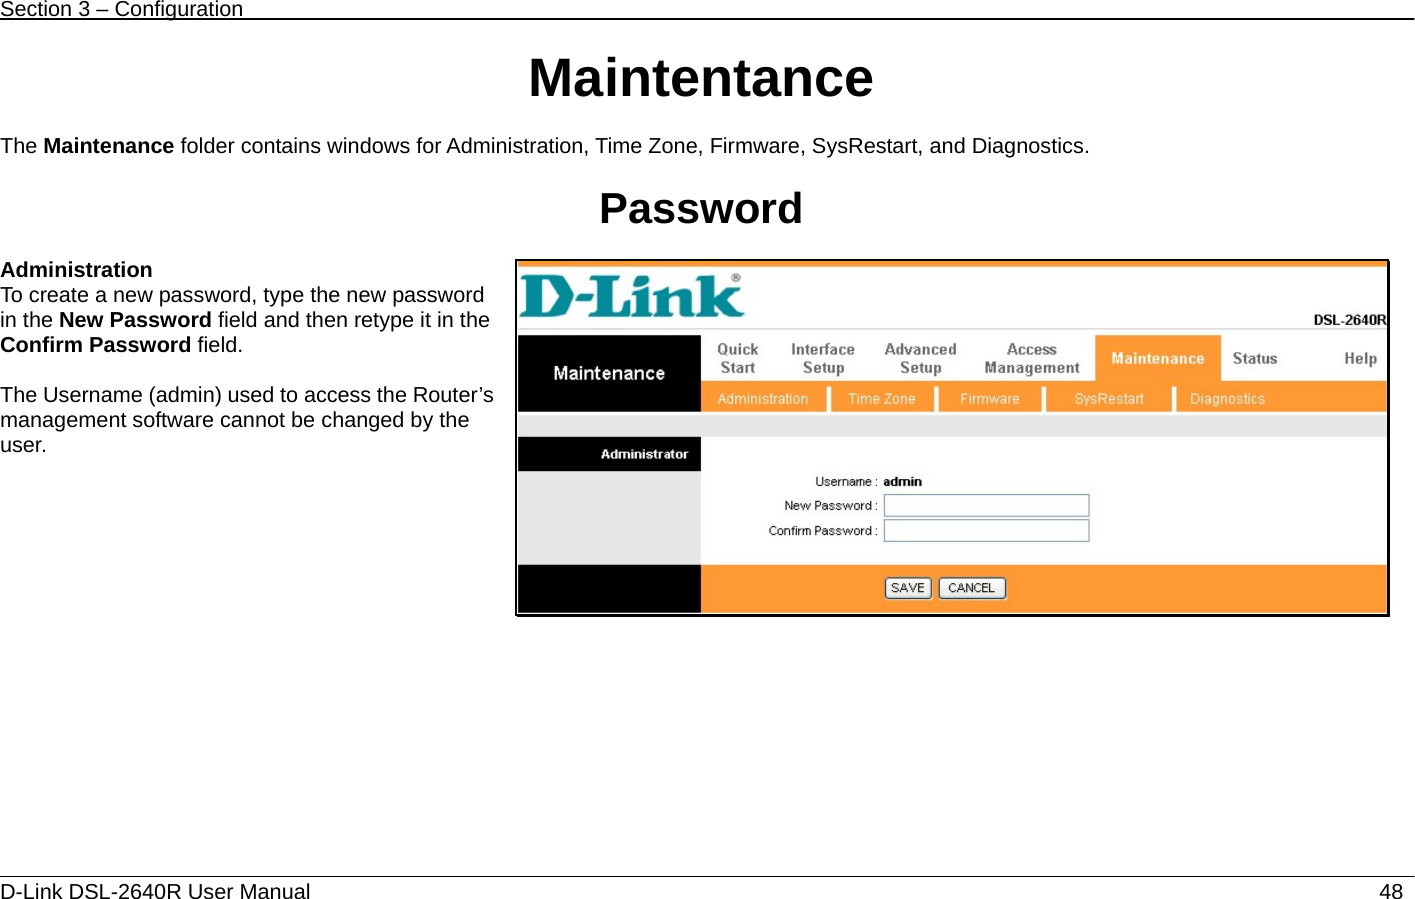 Section 3 – Configuration   D-Link DSL-2640R User Manual                           48Maintentance  The Maintenance folder contains windows for Administration, Time Zone, Firmware, SysRestart, and Diagnostics.  Password  Administration To create a new password, type the new password in the New Password field and then retype it in the Confirm Password field.  The Username (admin) used to access the Router’s management software cannot be changed by the user.   